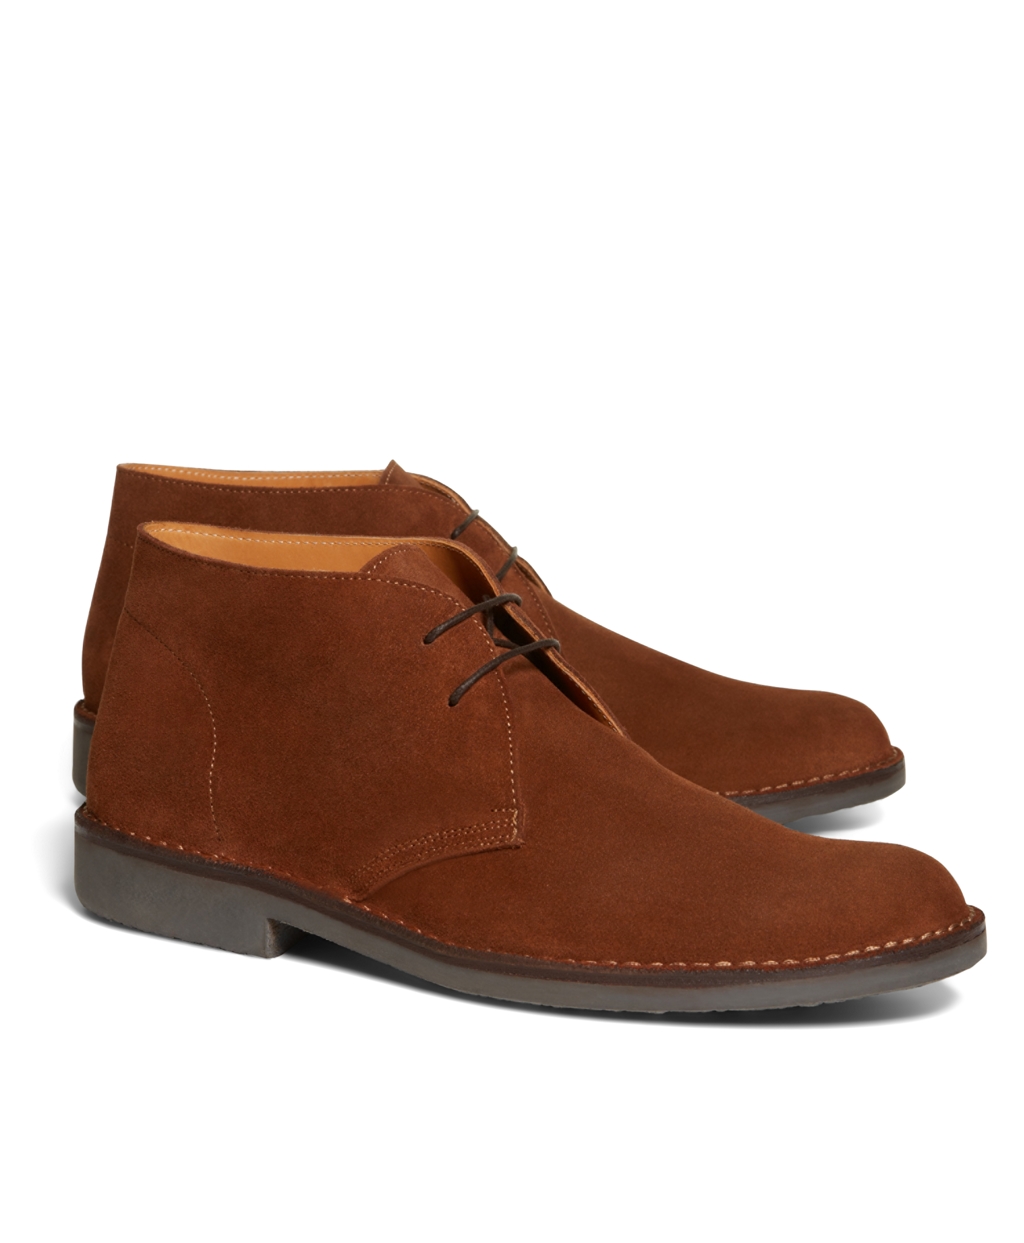 Lyst - Brooks Brothers Field Chukka Boots in Brown for Men